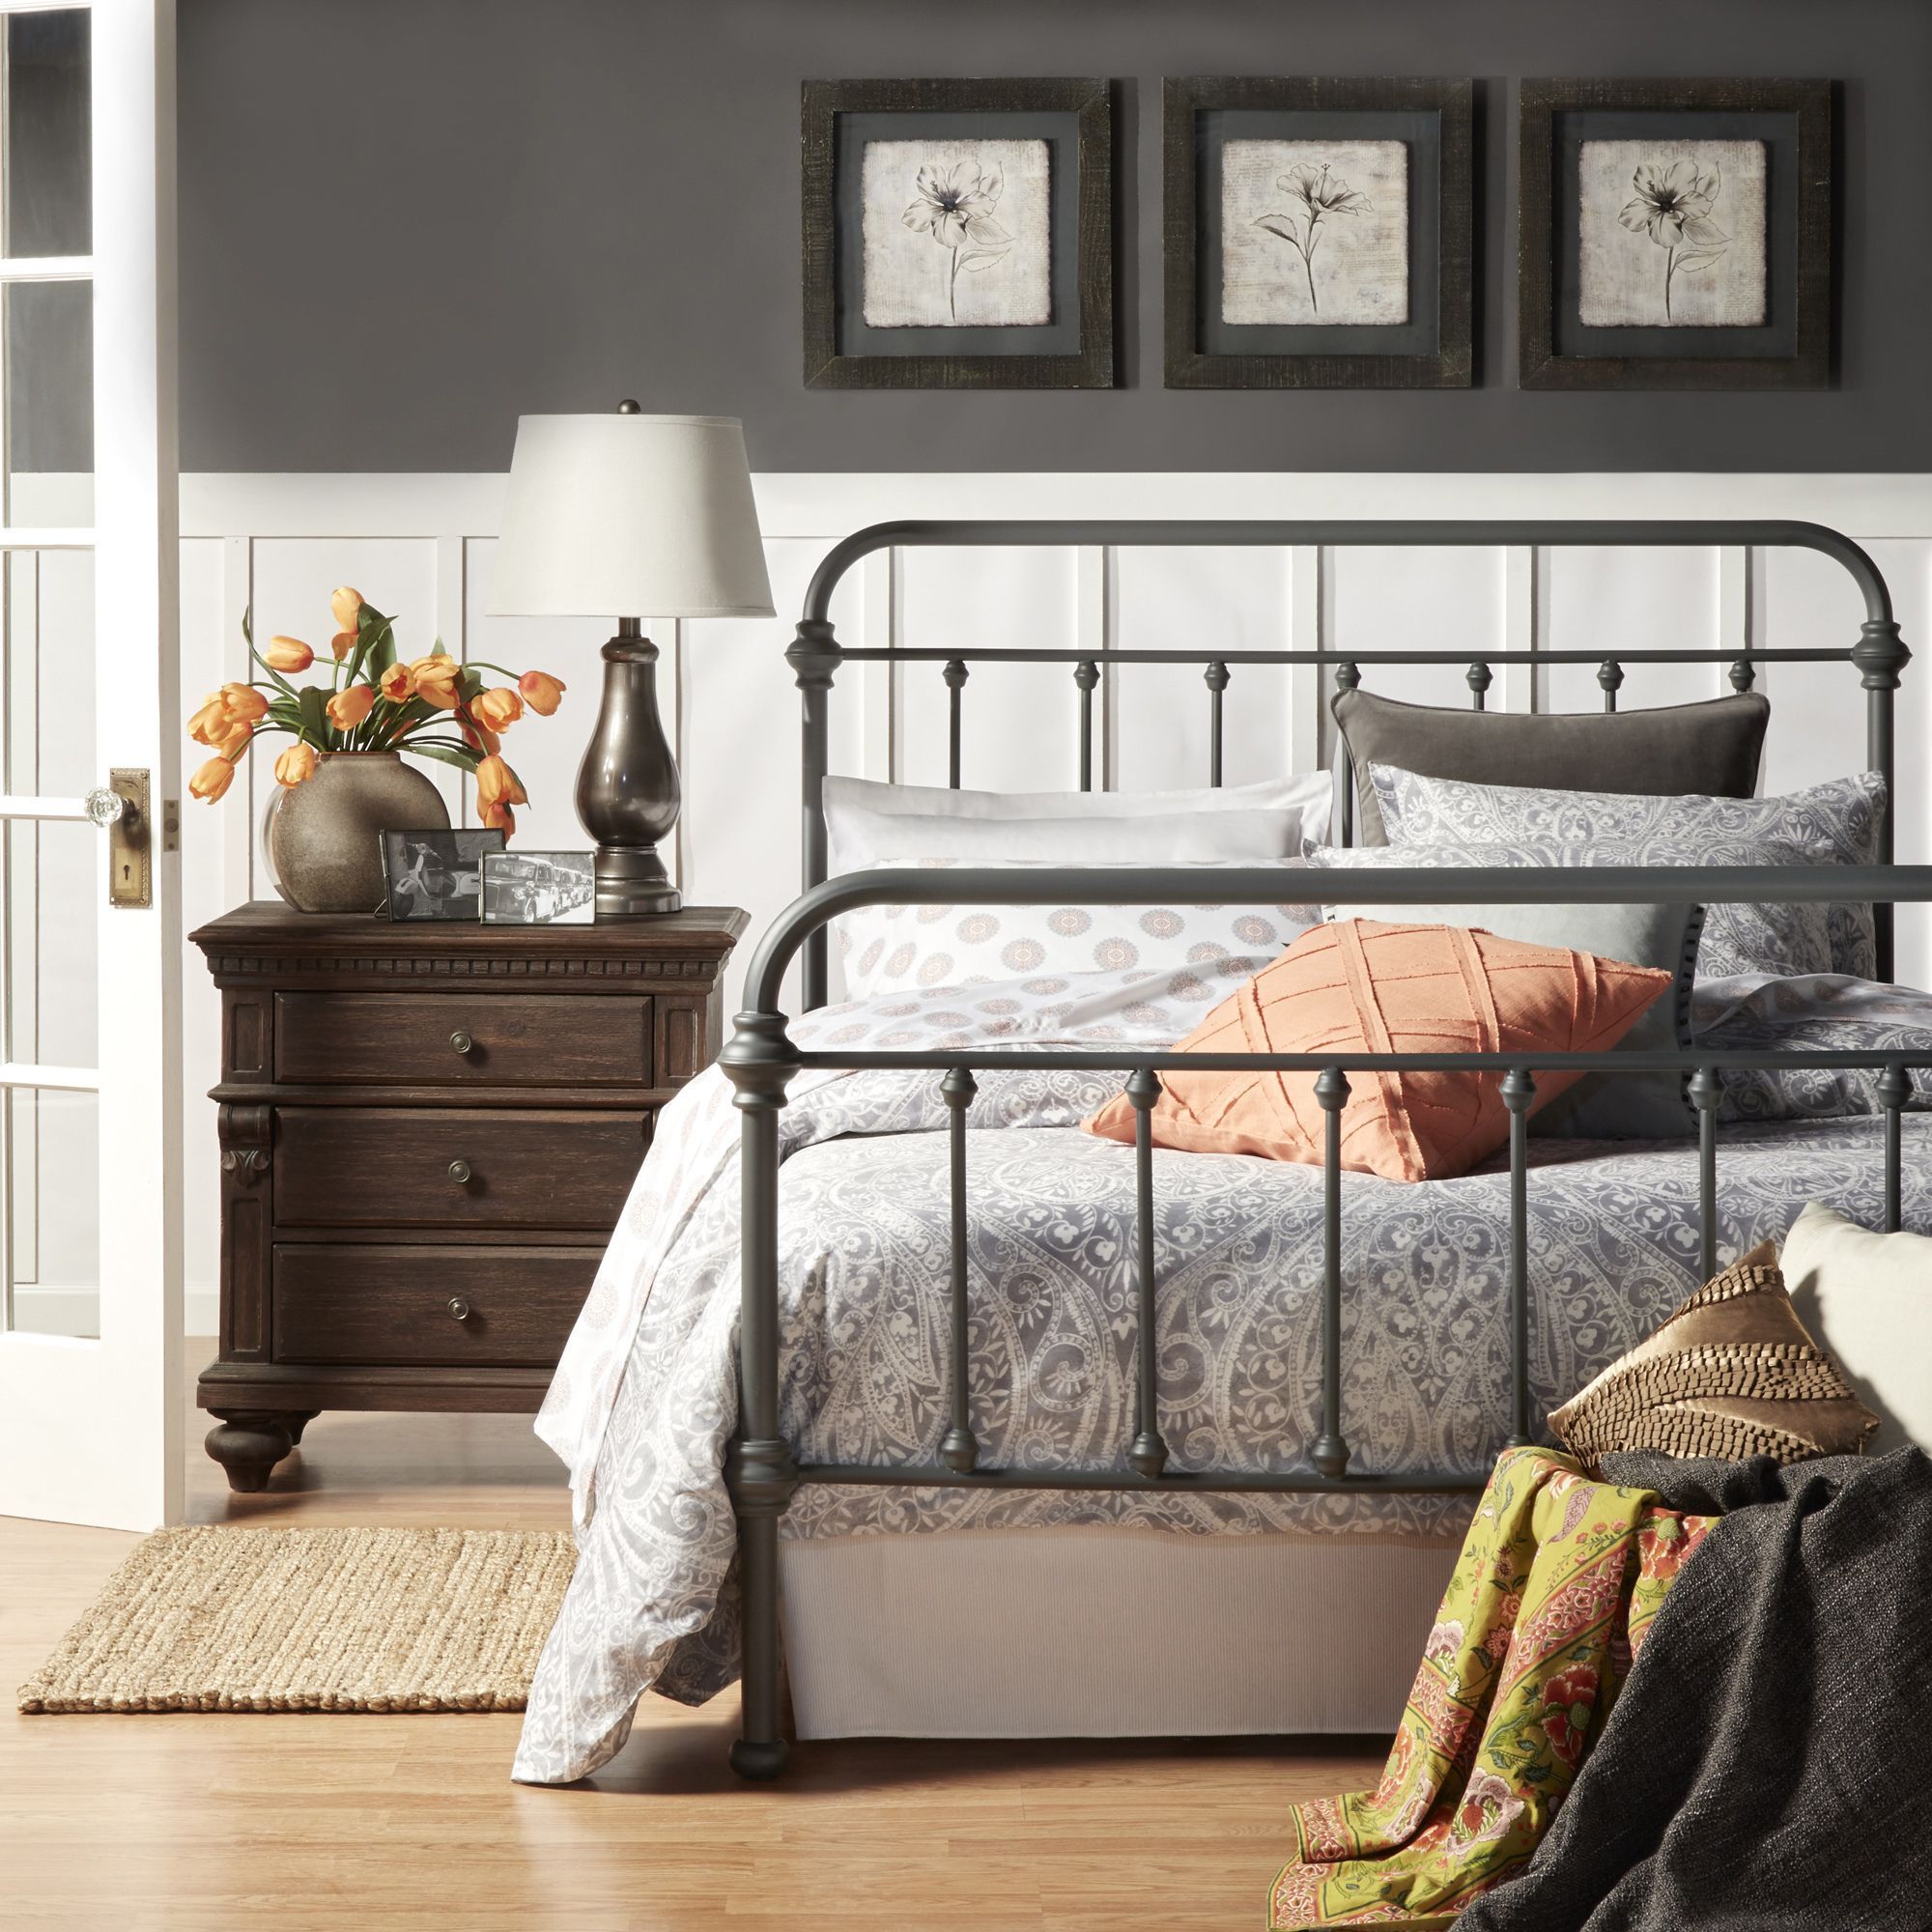 Frame with spindles in the headboard and footboard, feature elegance crafted casting at each joint. Th